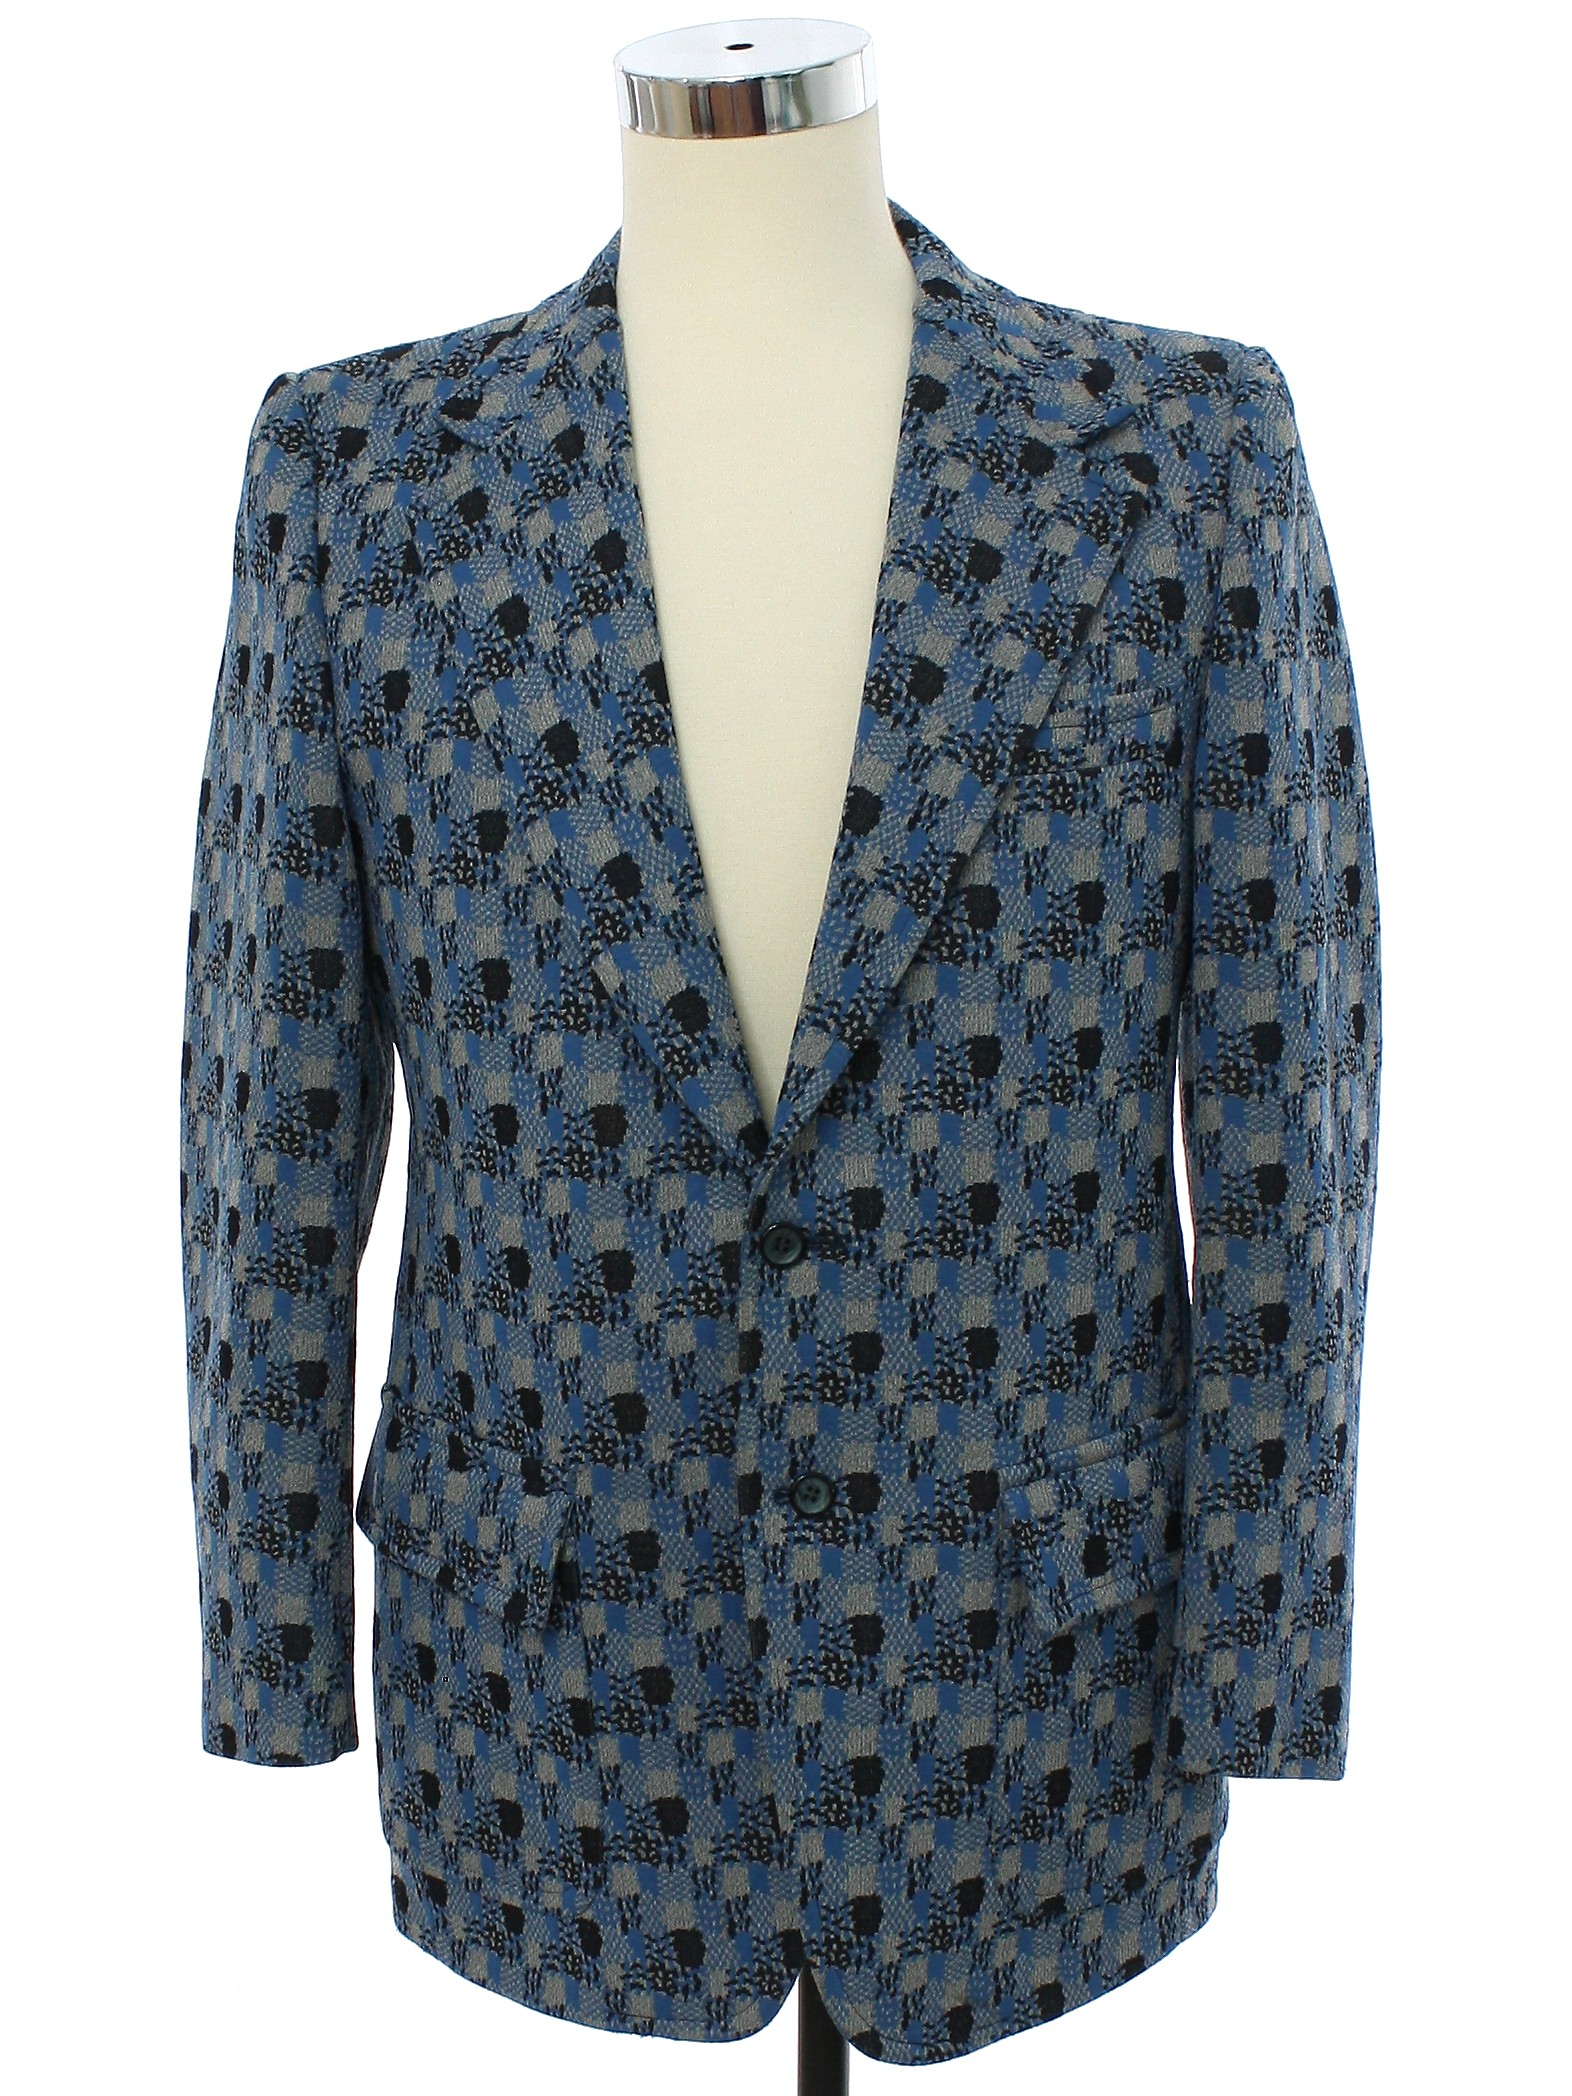 Vintage 1970's Jacket: 70s -Towncraft JcPenney- Mens shades of blue and ...